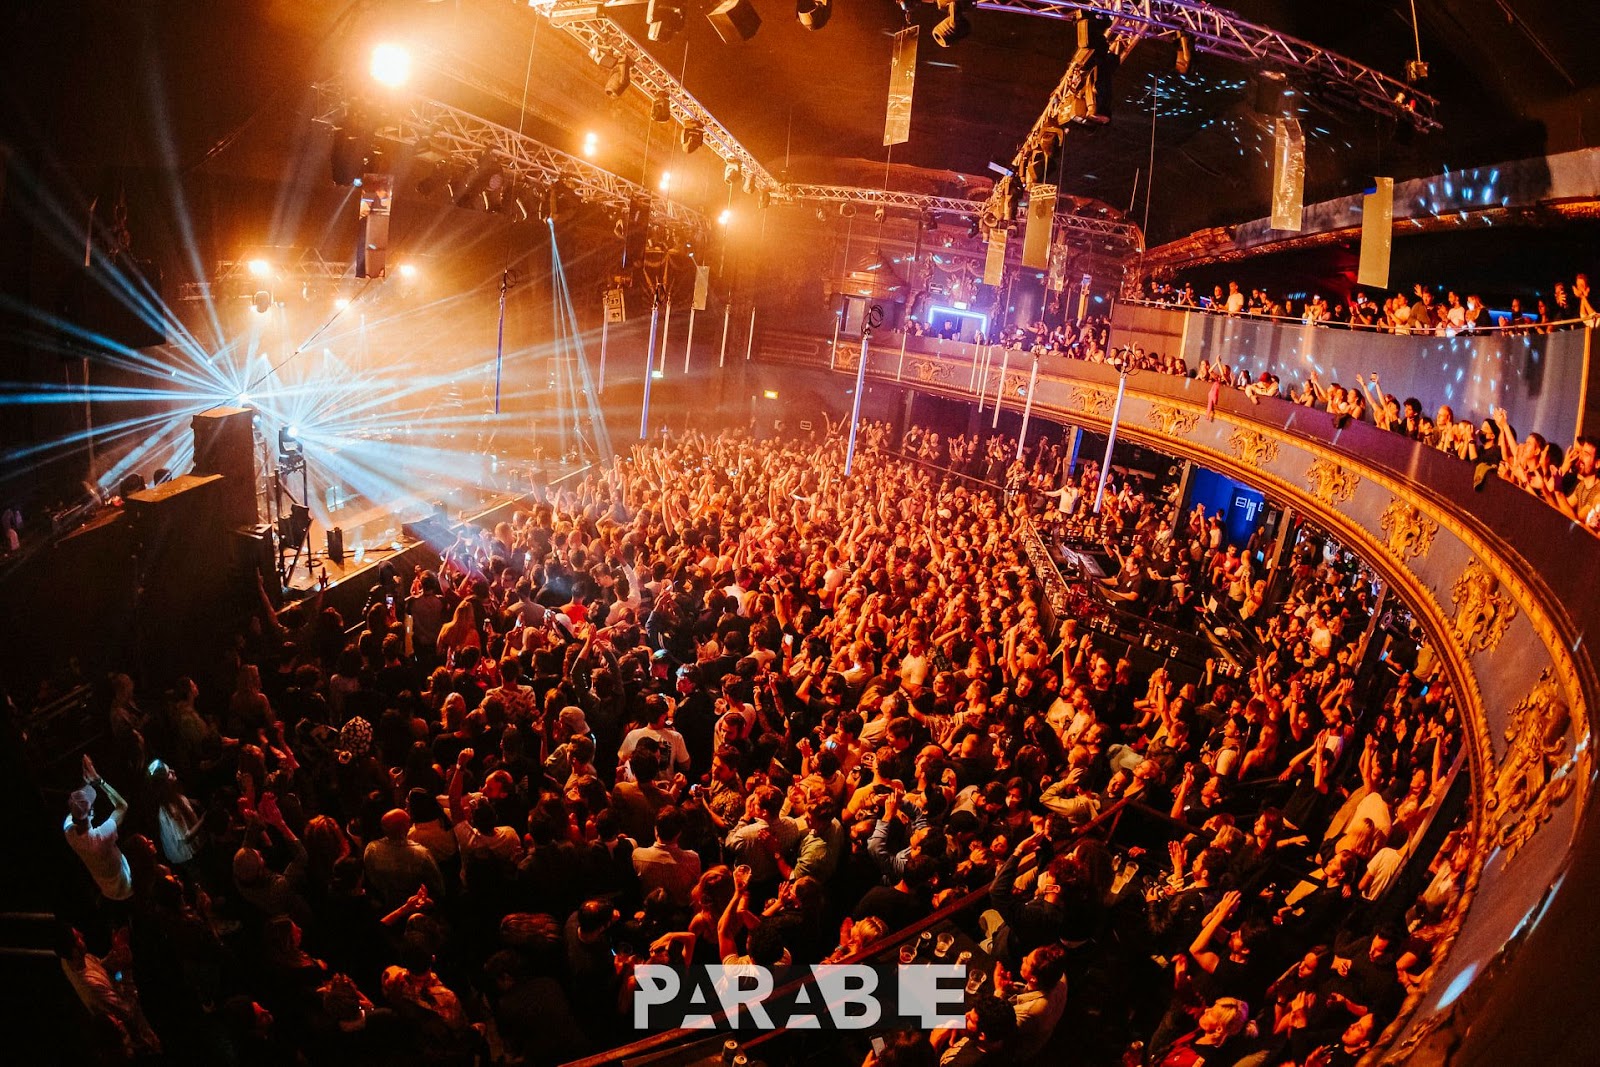 Parable announced a huge Spring Series across multiple London venues!